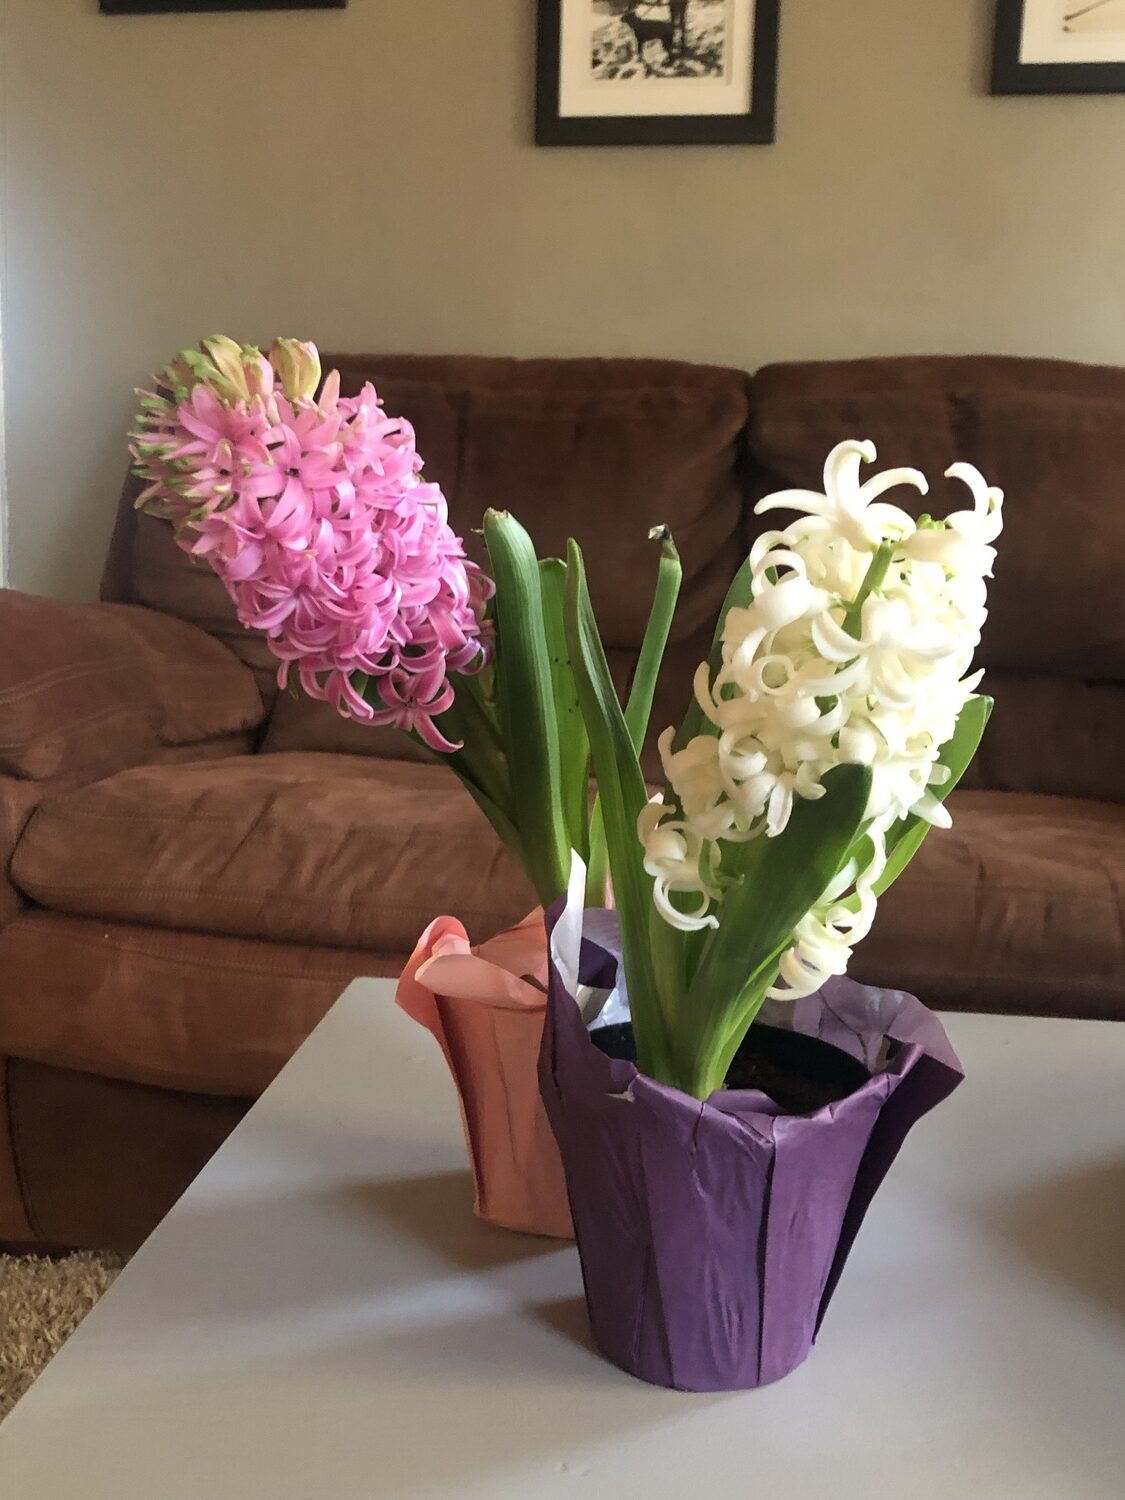 Rather than using chemical air fresheners, which ironically are bad for your health and for the planet, employ the ultimate natural air freshener. Local flowers like hyacinths, tulips and daffodils are in bloom now locally. JENNY NOBLE